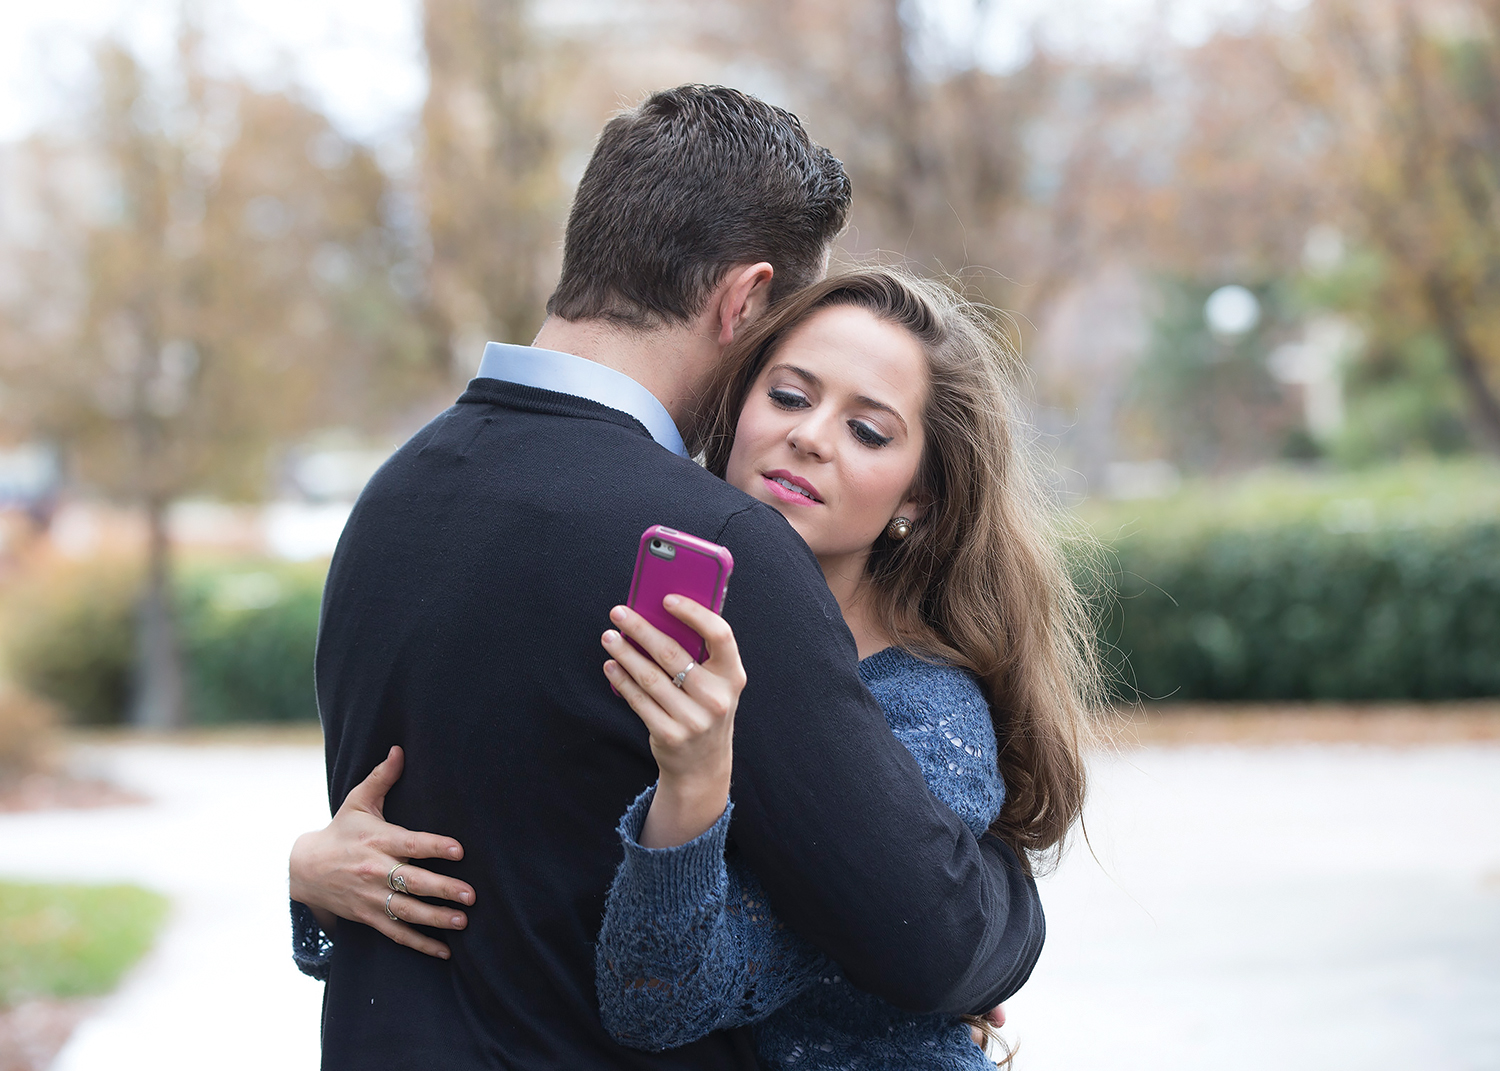 An embracing couple is distracted by cell phones.